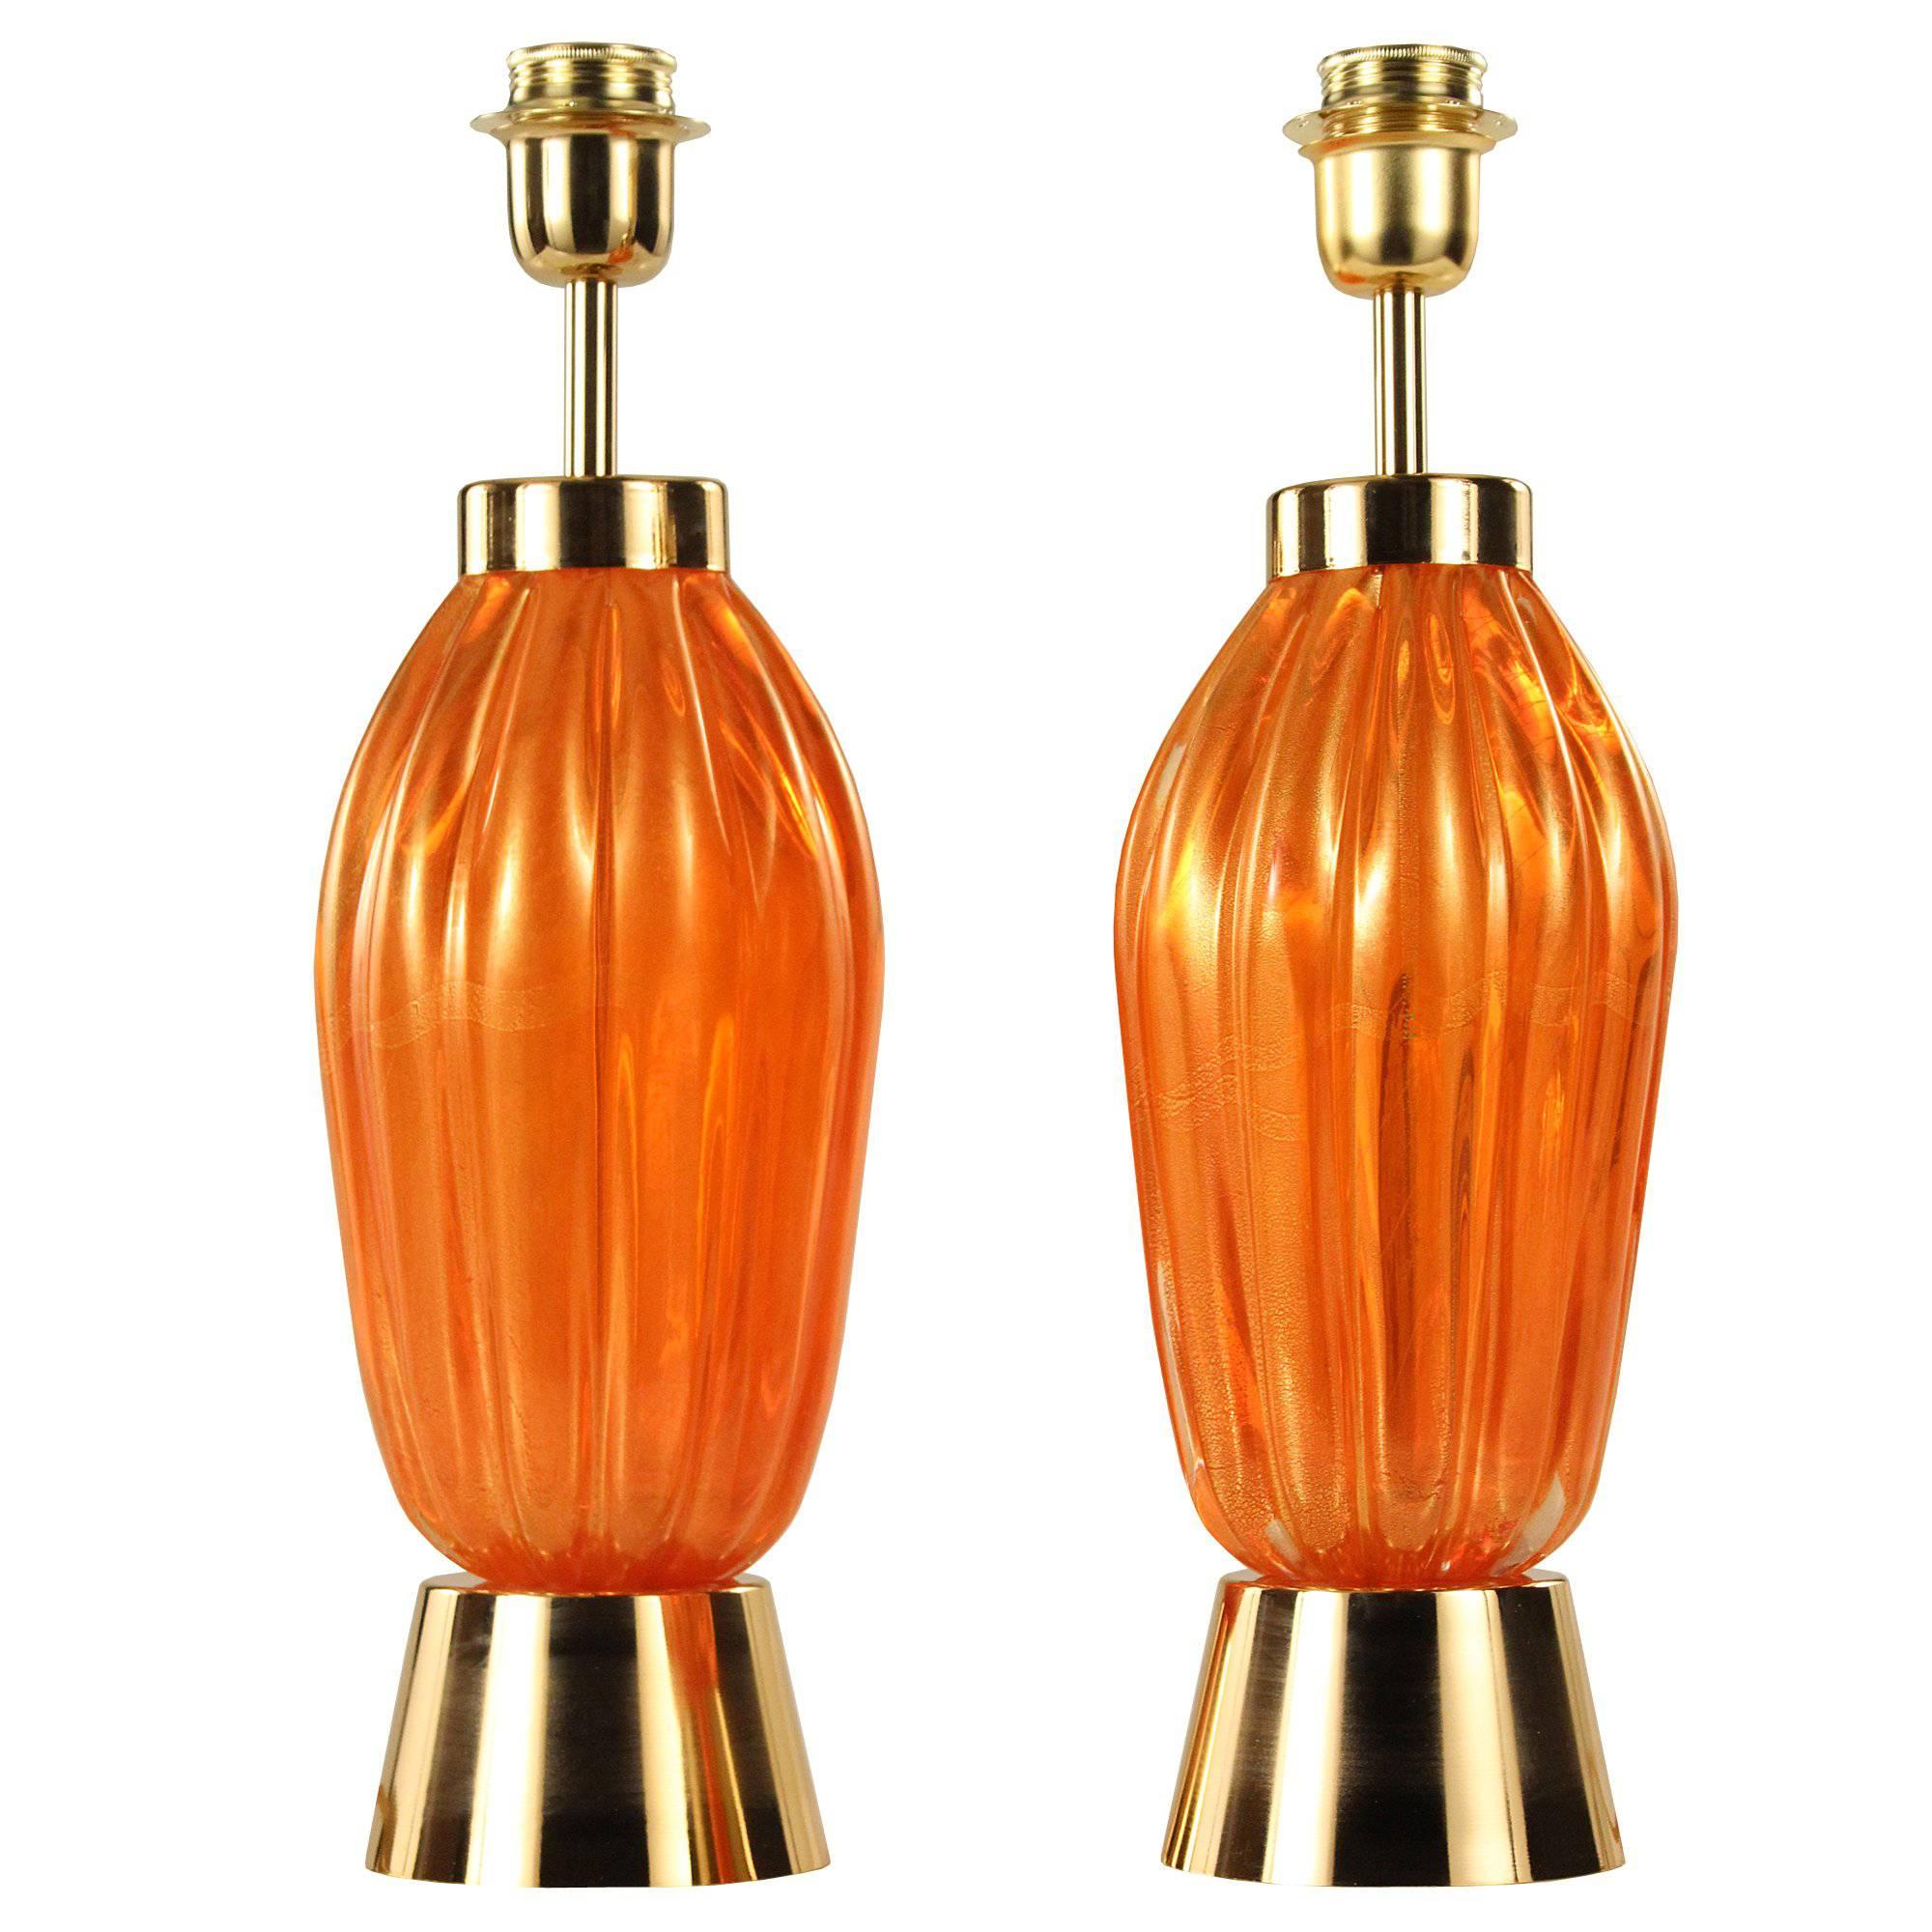 Pair of Vintage Murano Blown Glass Table Lamps, Orange and Gold Leaf